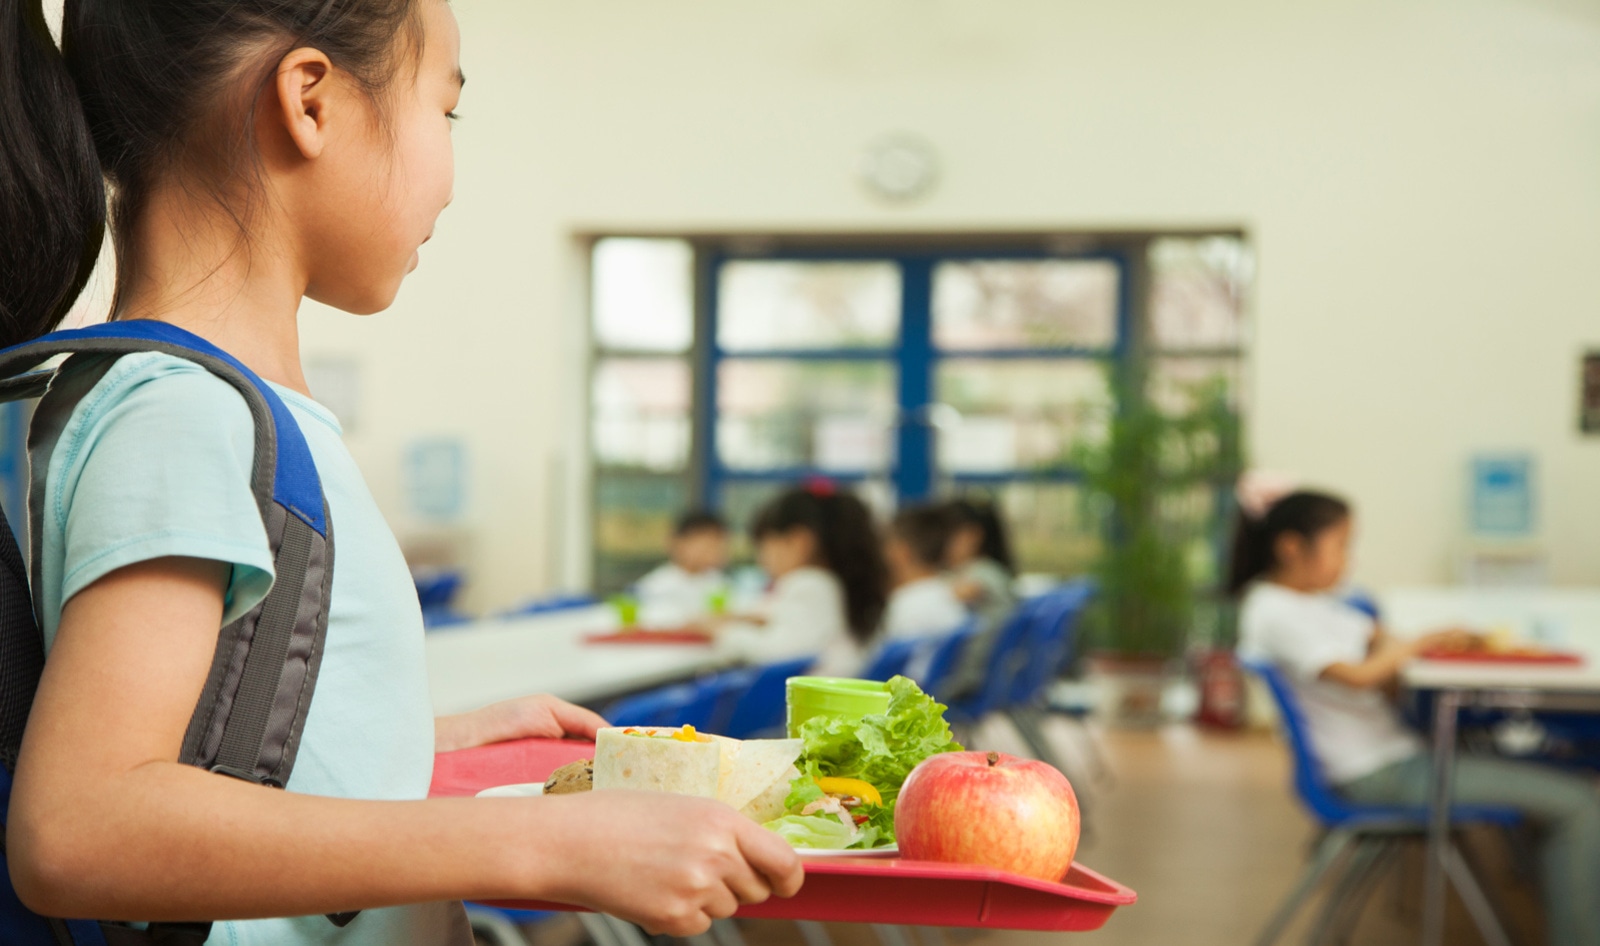 New York City Public Schools Now Serve Vegan Meals to 930,000 Students Every Friday